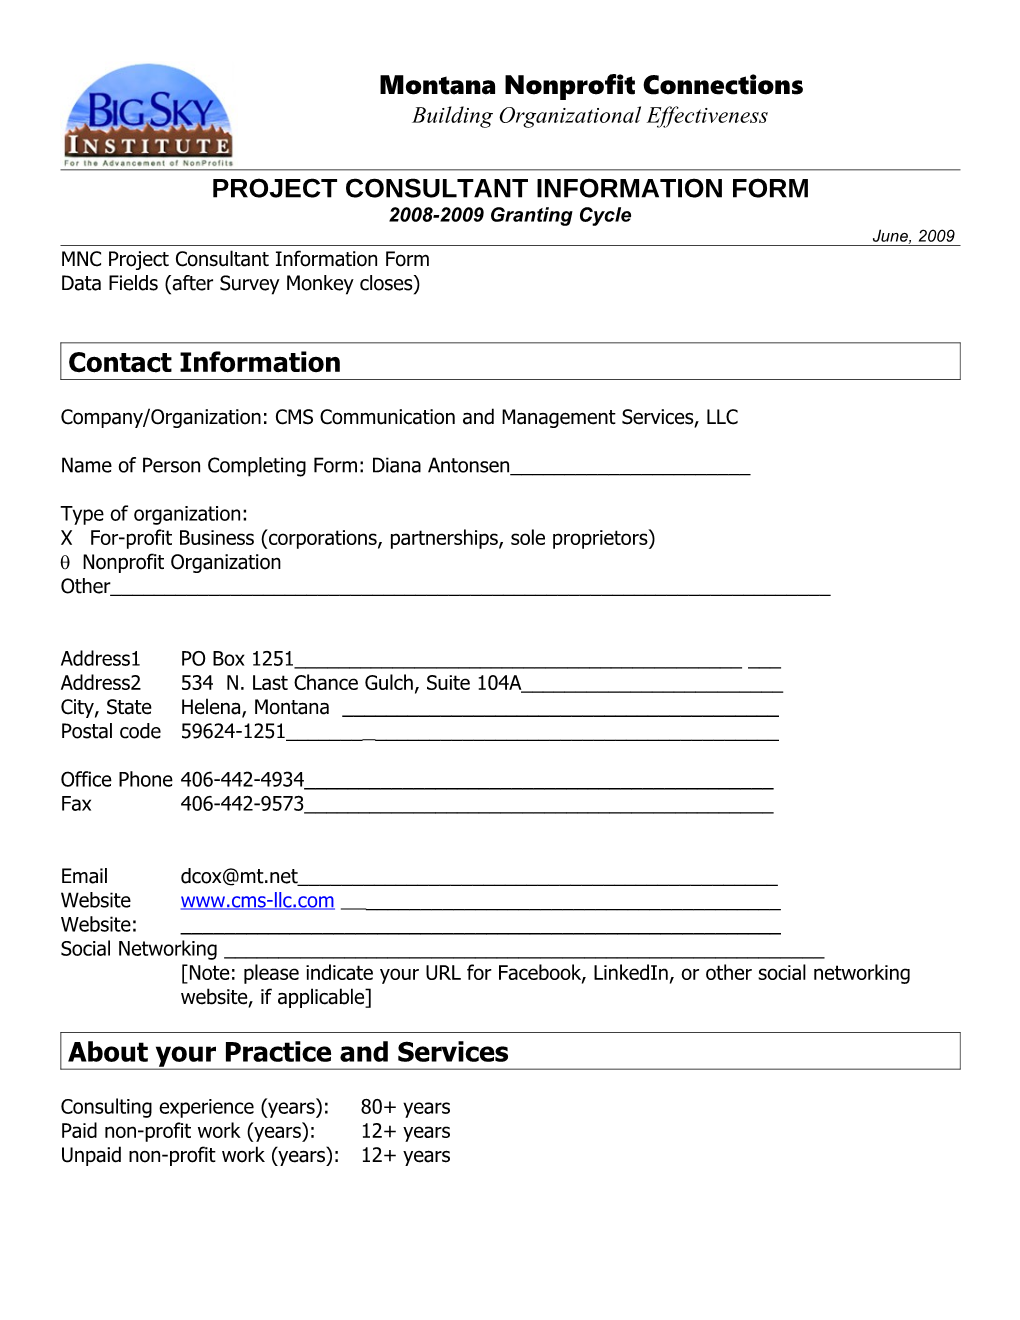 MNC Project Consultant Information Form